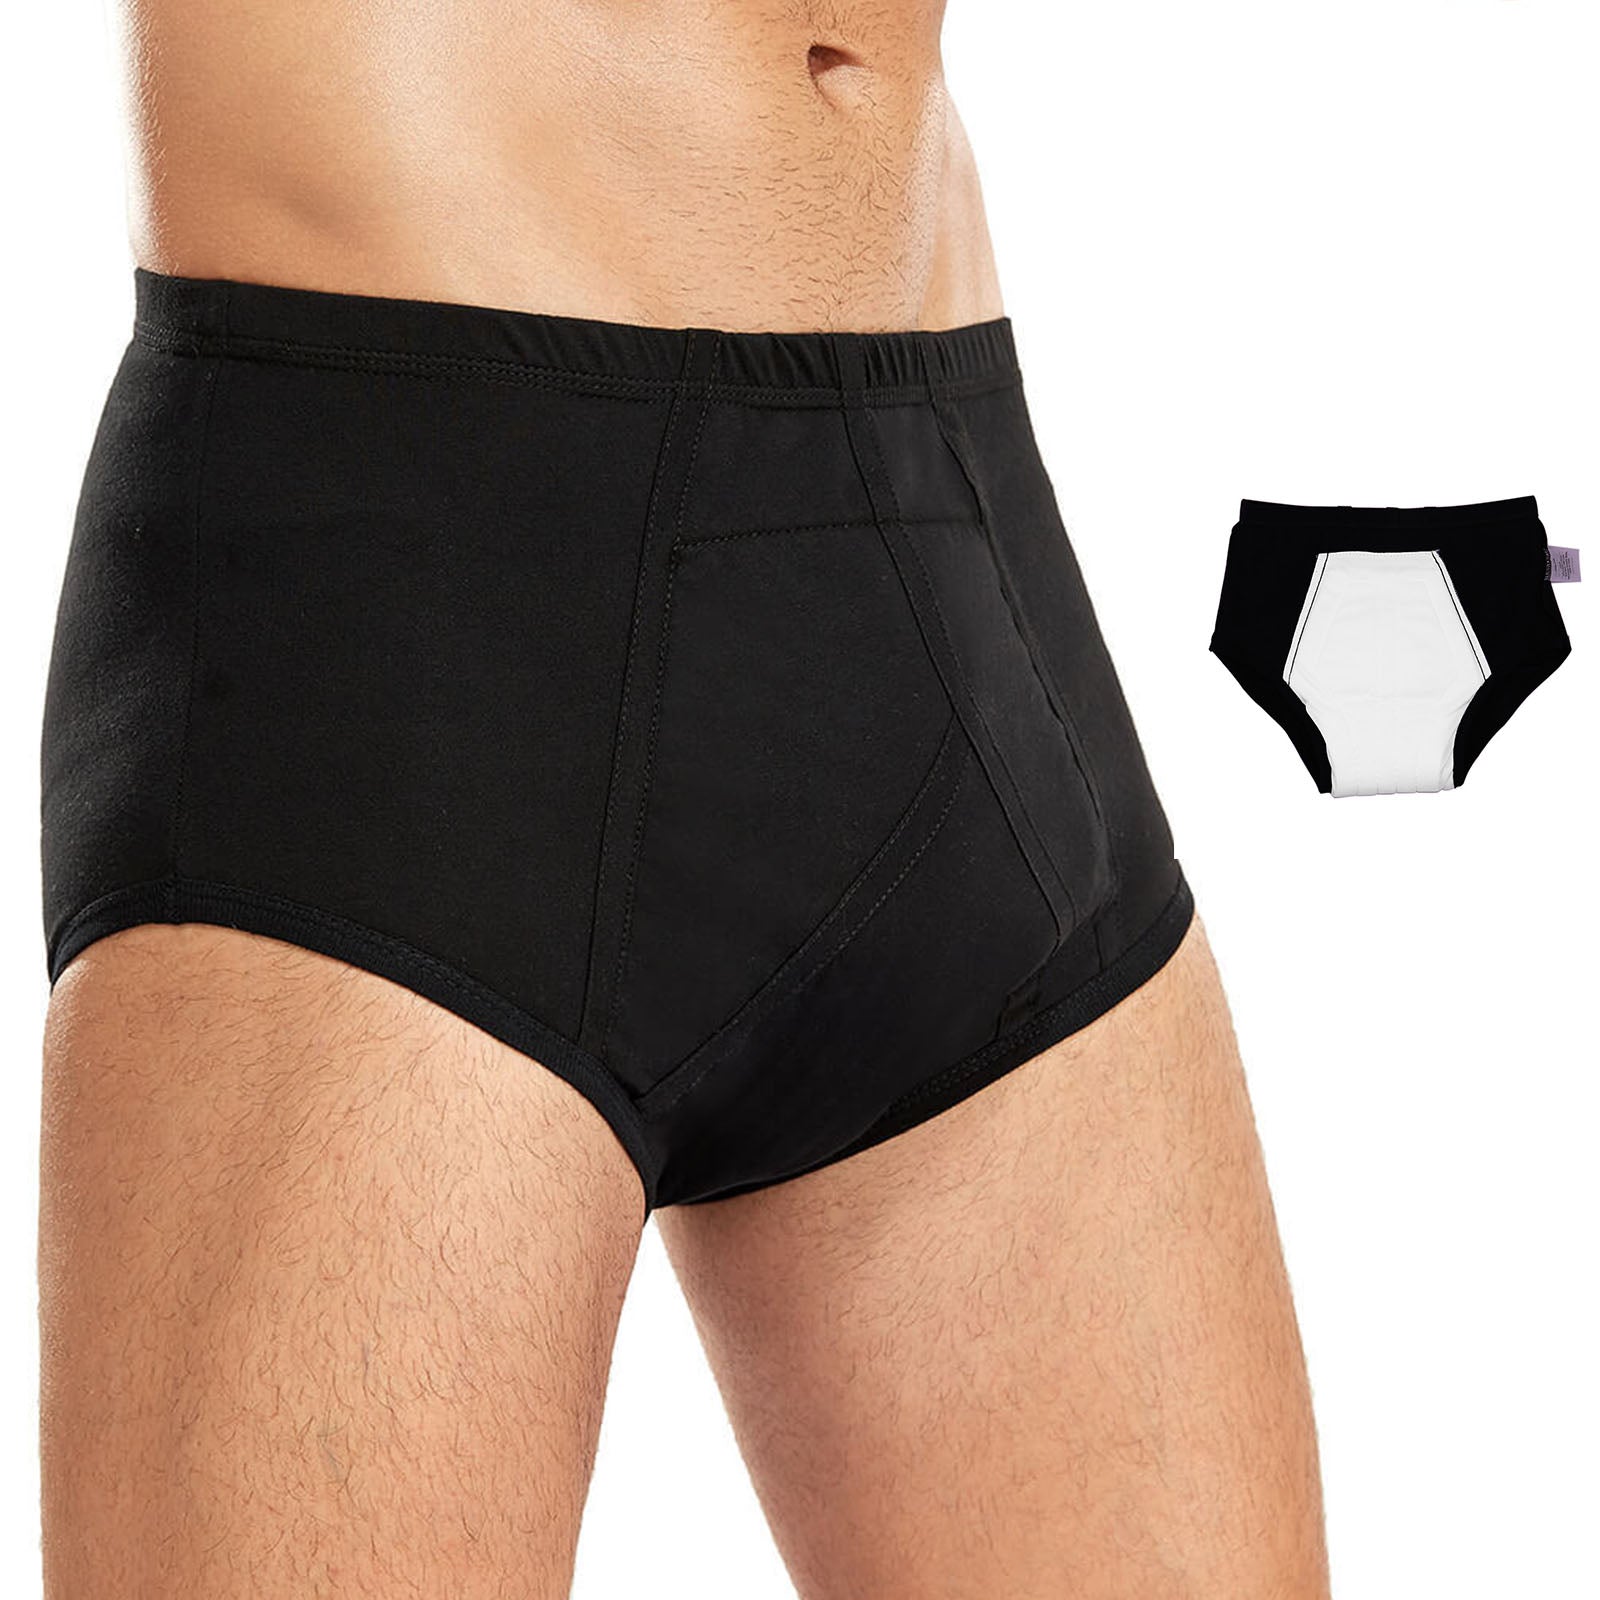  Incontinence Underwear For Men Carer 3-Pack Mens Urinary  Incontinence Briefs Washable Reusable Underwear